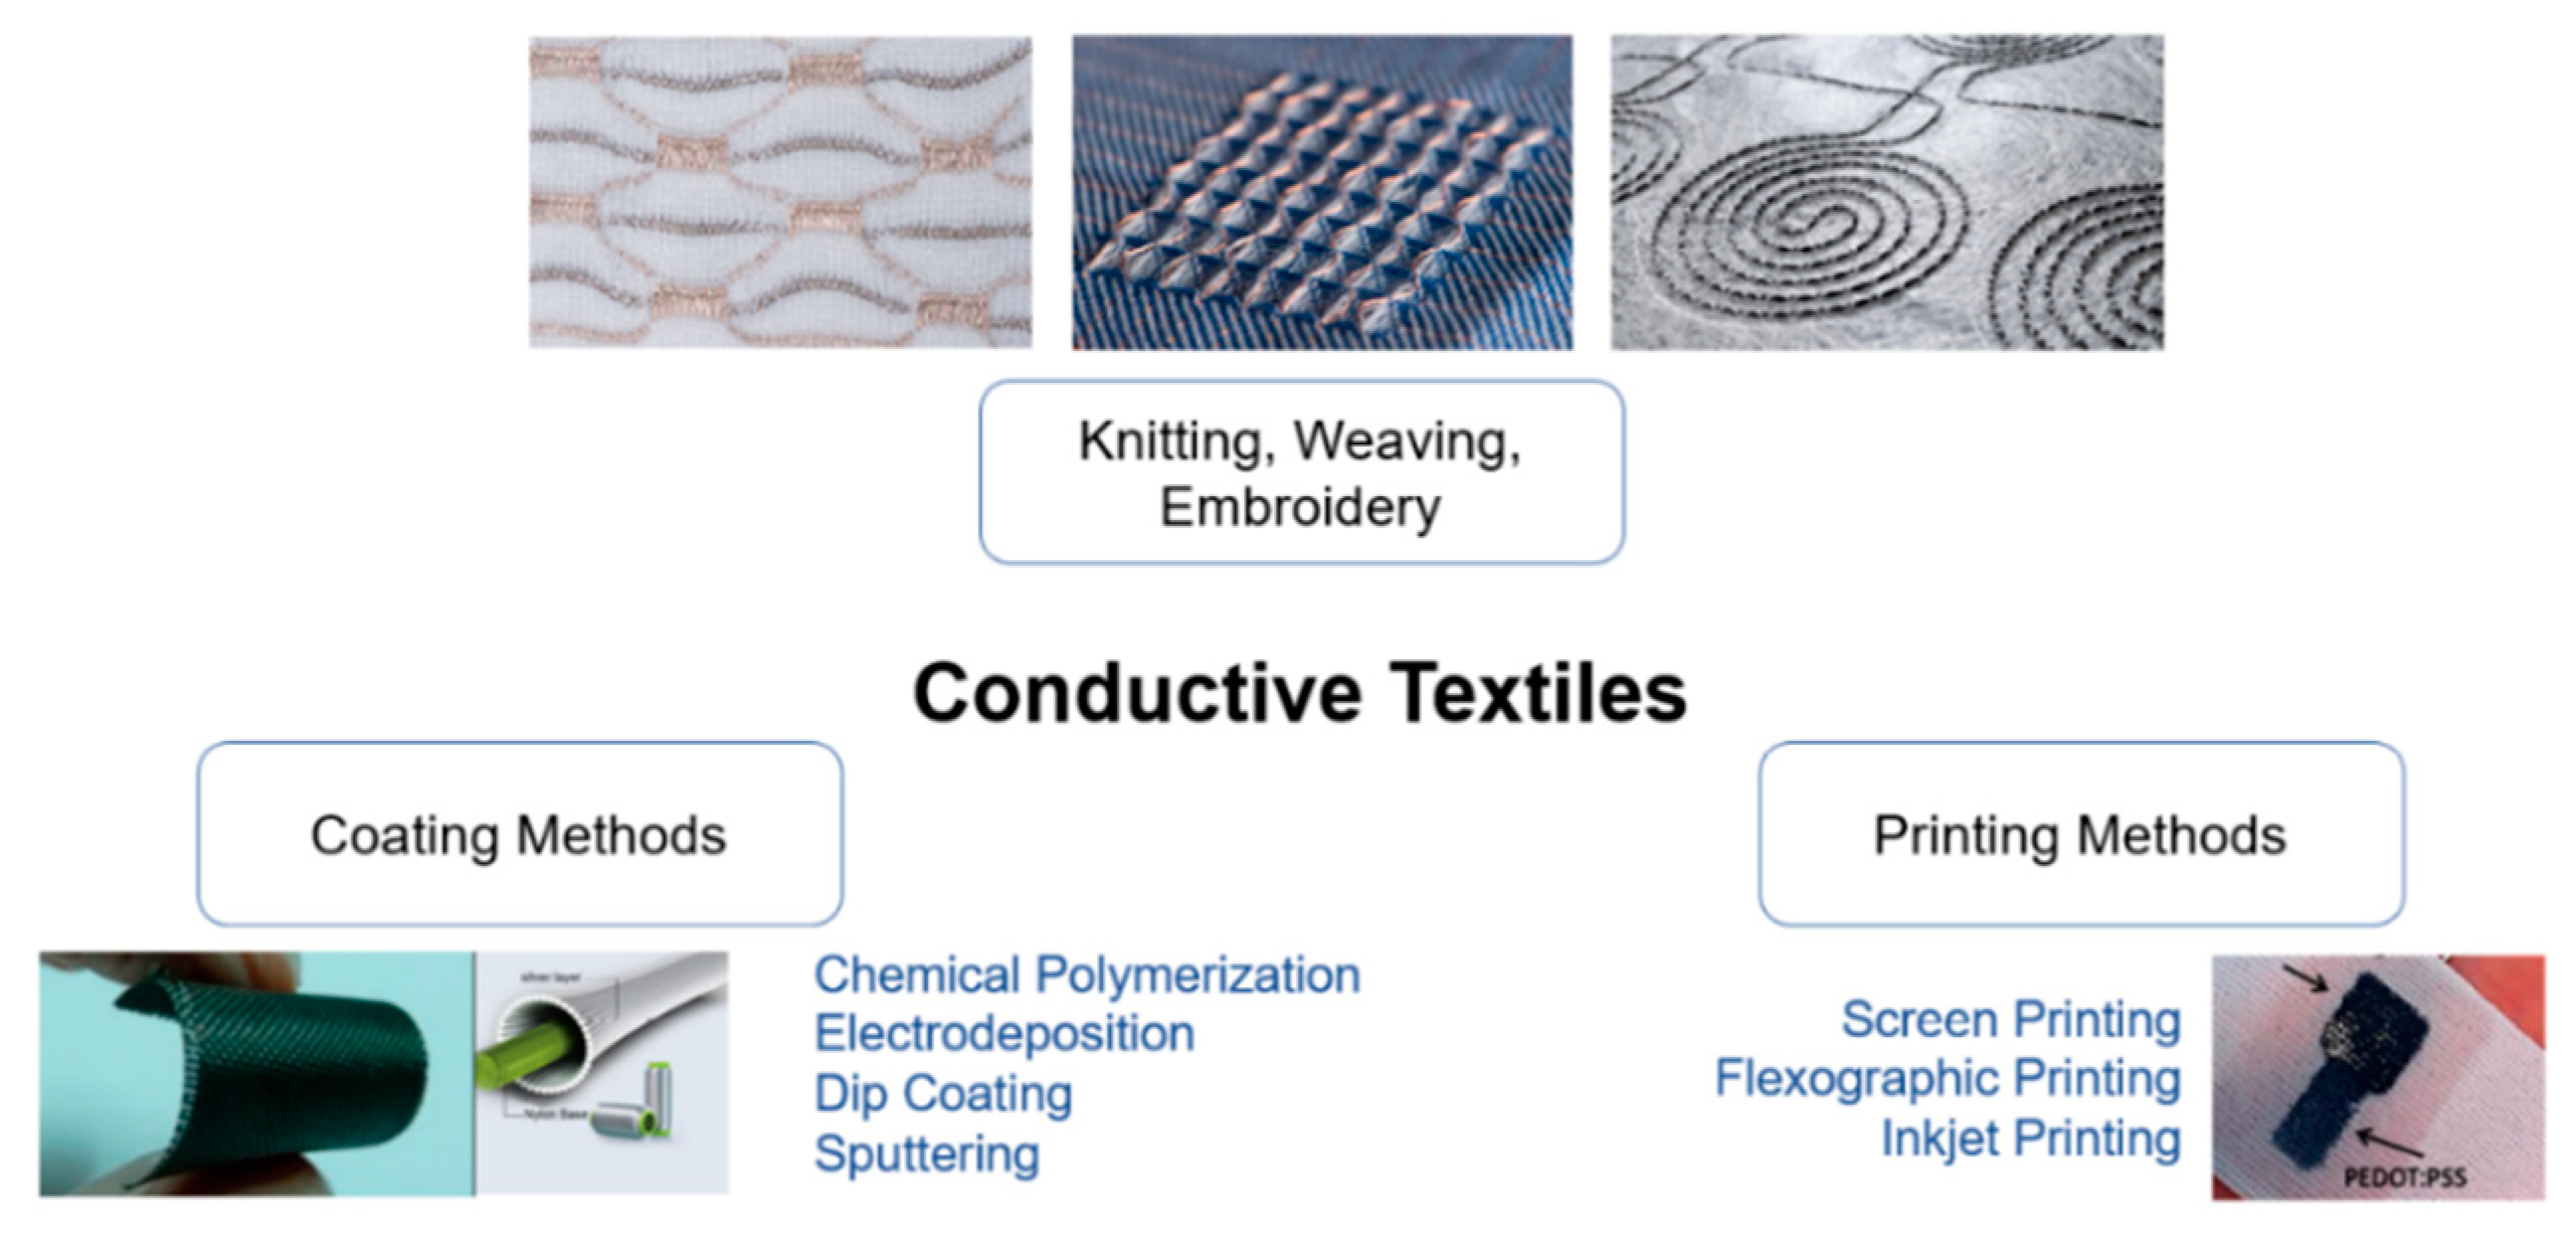 Introduction to breathable water-repellent textiles and their production  methods - Textile School